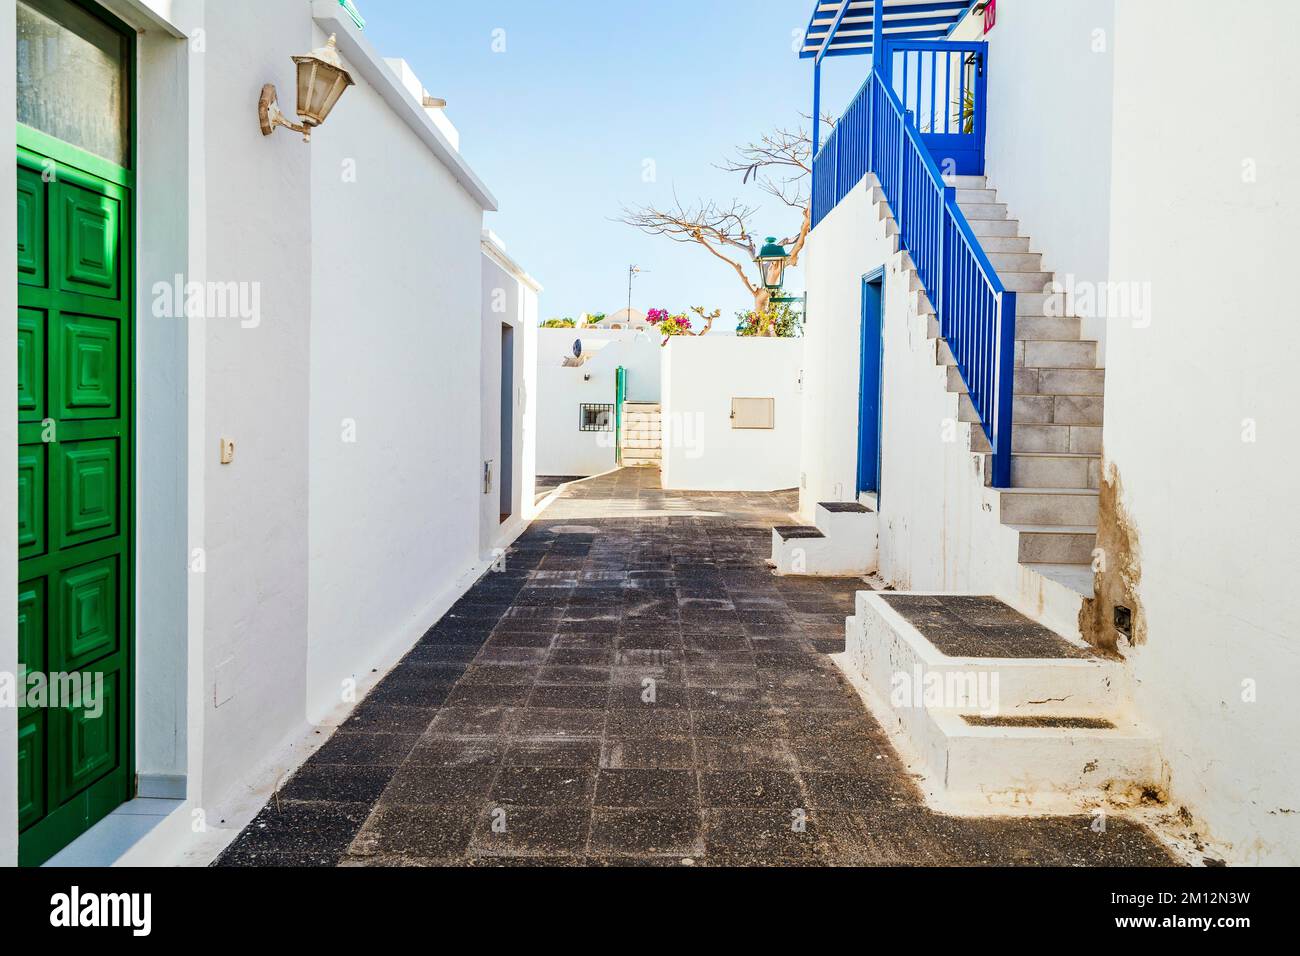 Picturesque white settlement called Pueblo Marinero designed by Cesar Manrique located in Costa Teguise, Lanzarote, Canary Island, Spain, Europe Stock Photo